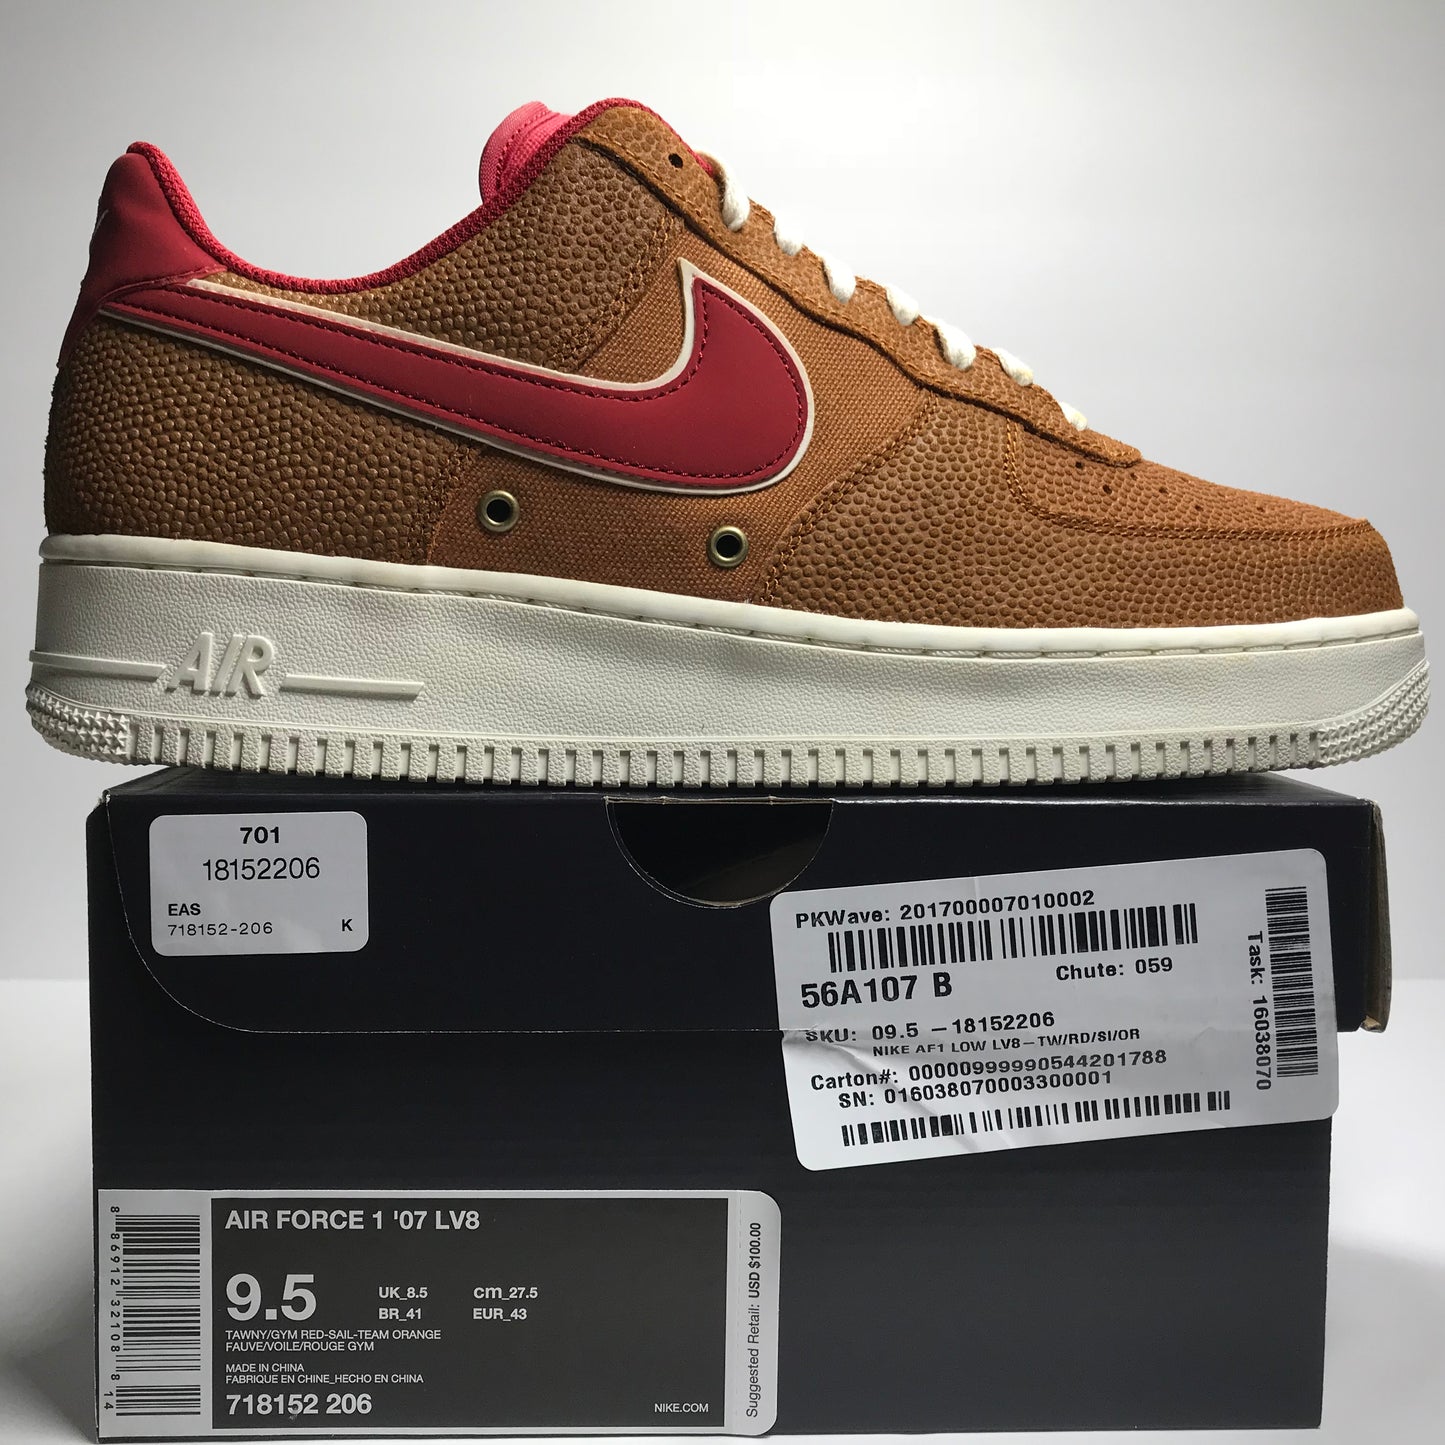 Nike Air Force 1 Low '07 LV8 - 718152 206 - Taille 9.5 Tawny/Gym Red Basket Cuir